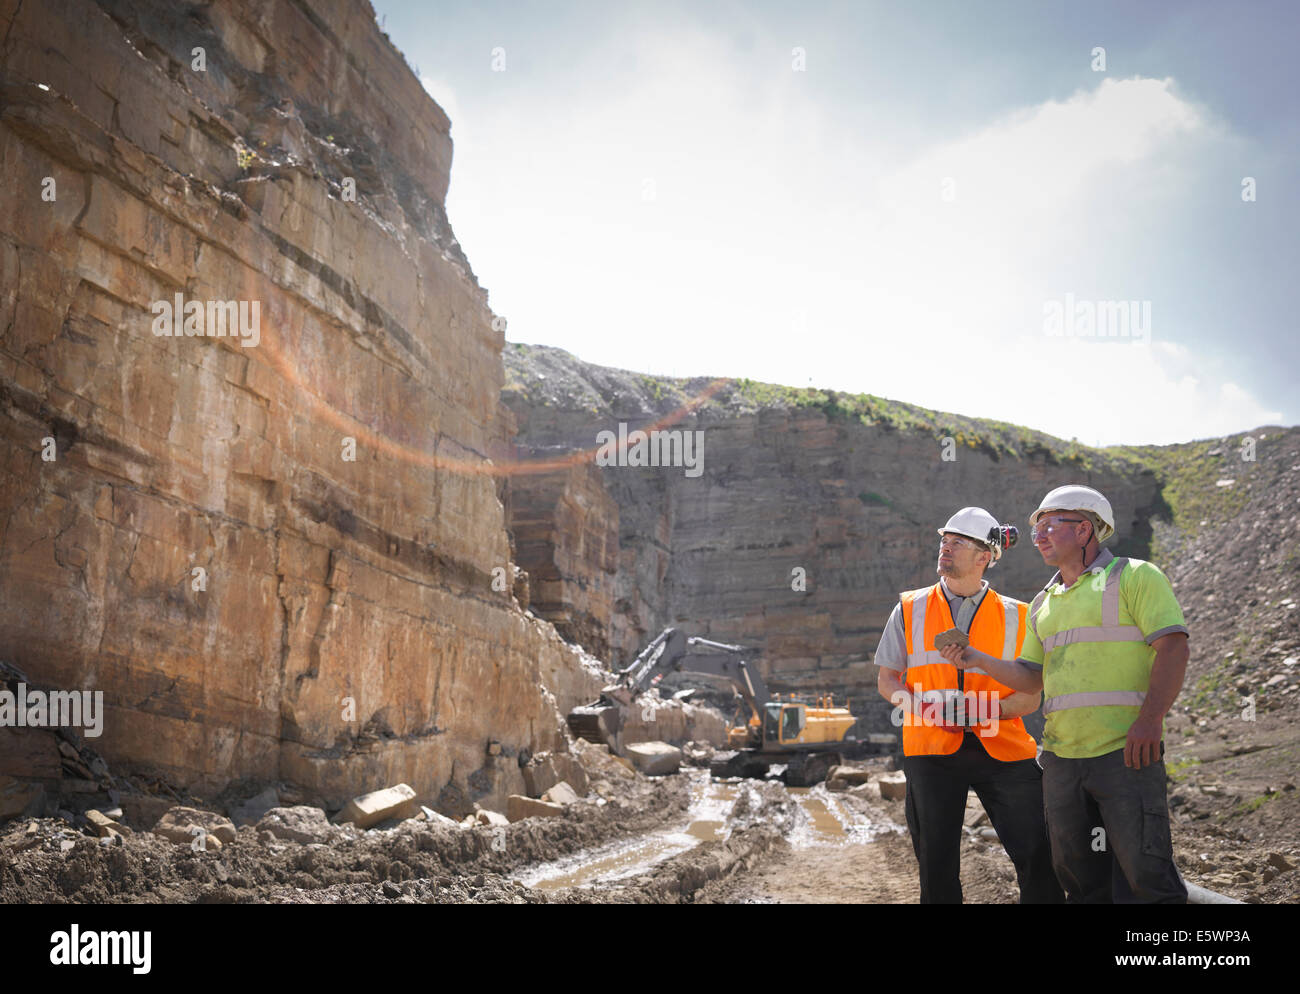 Quarry workers inspecting rock strata in stone quarry Stock Photo